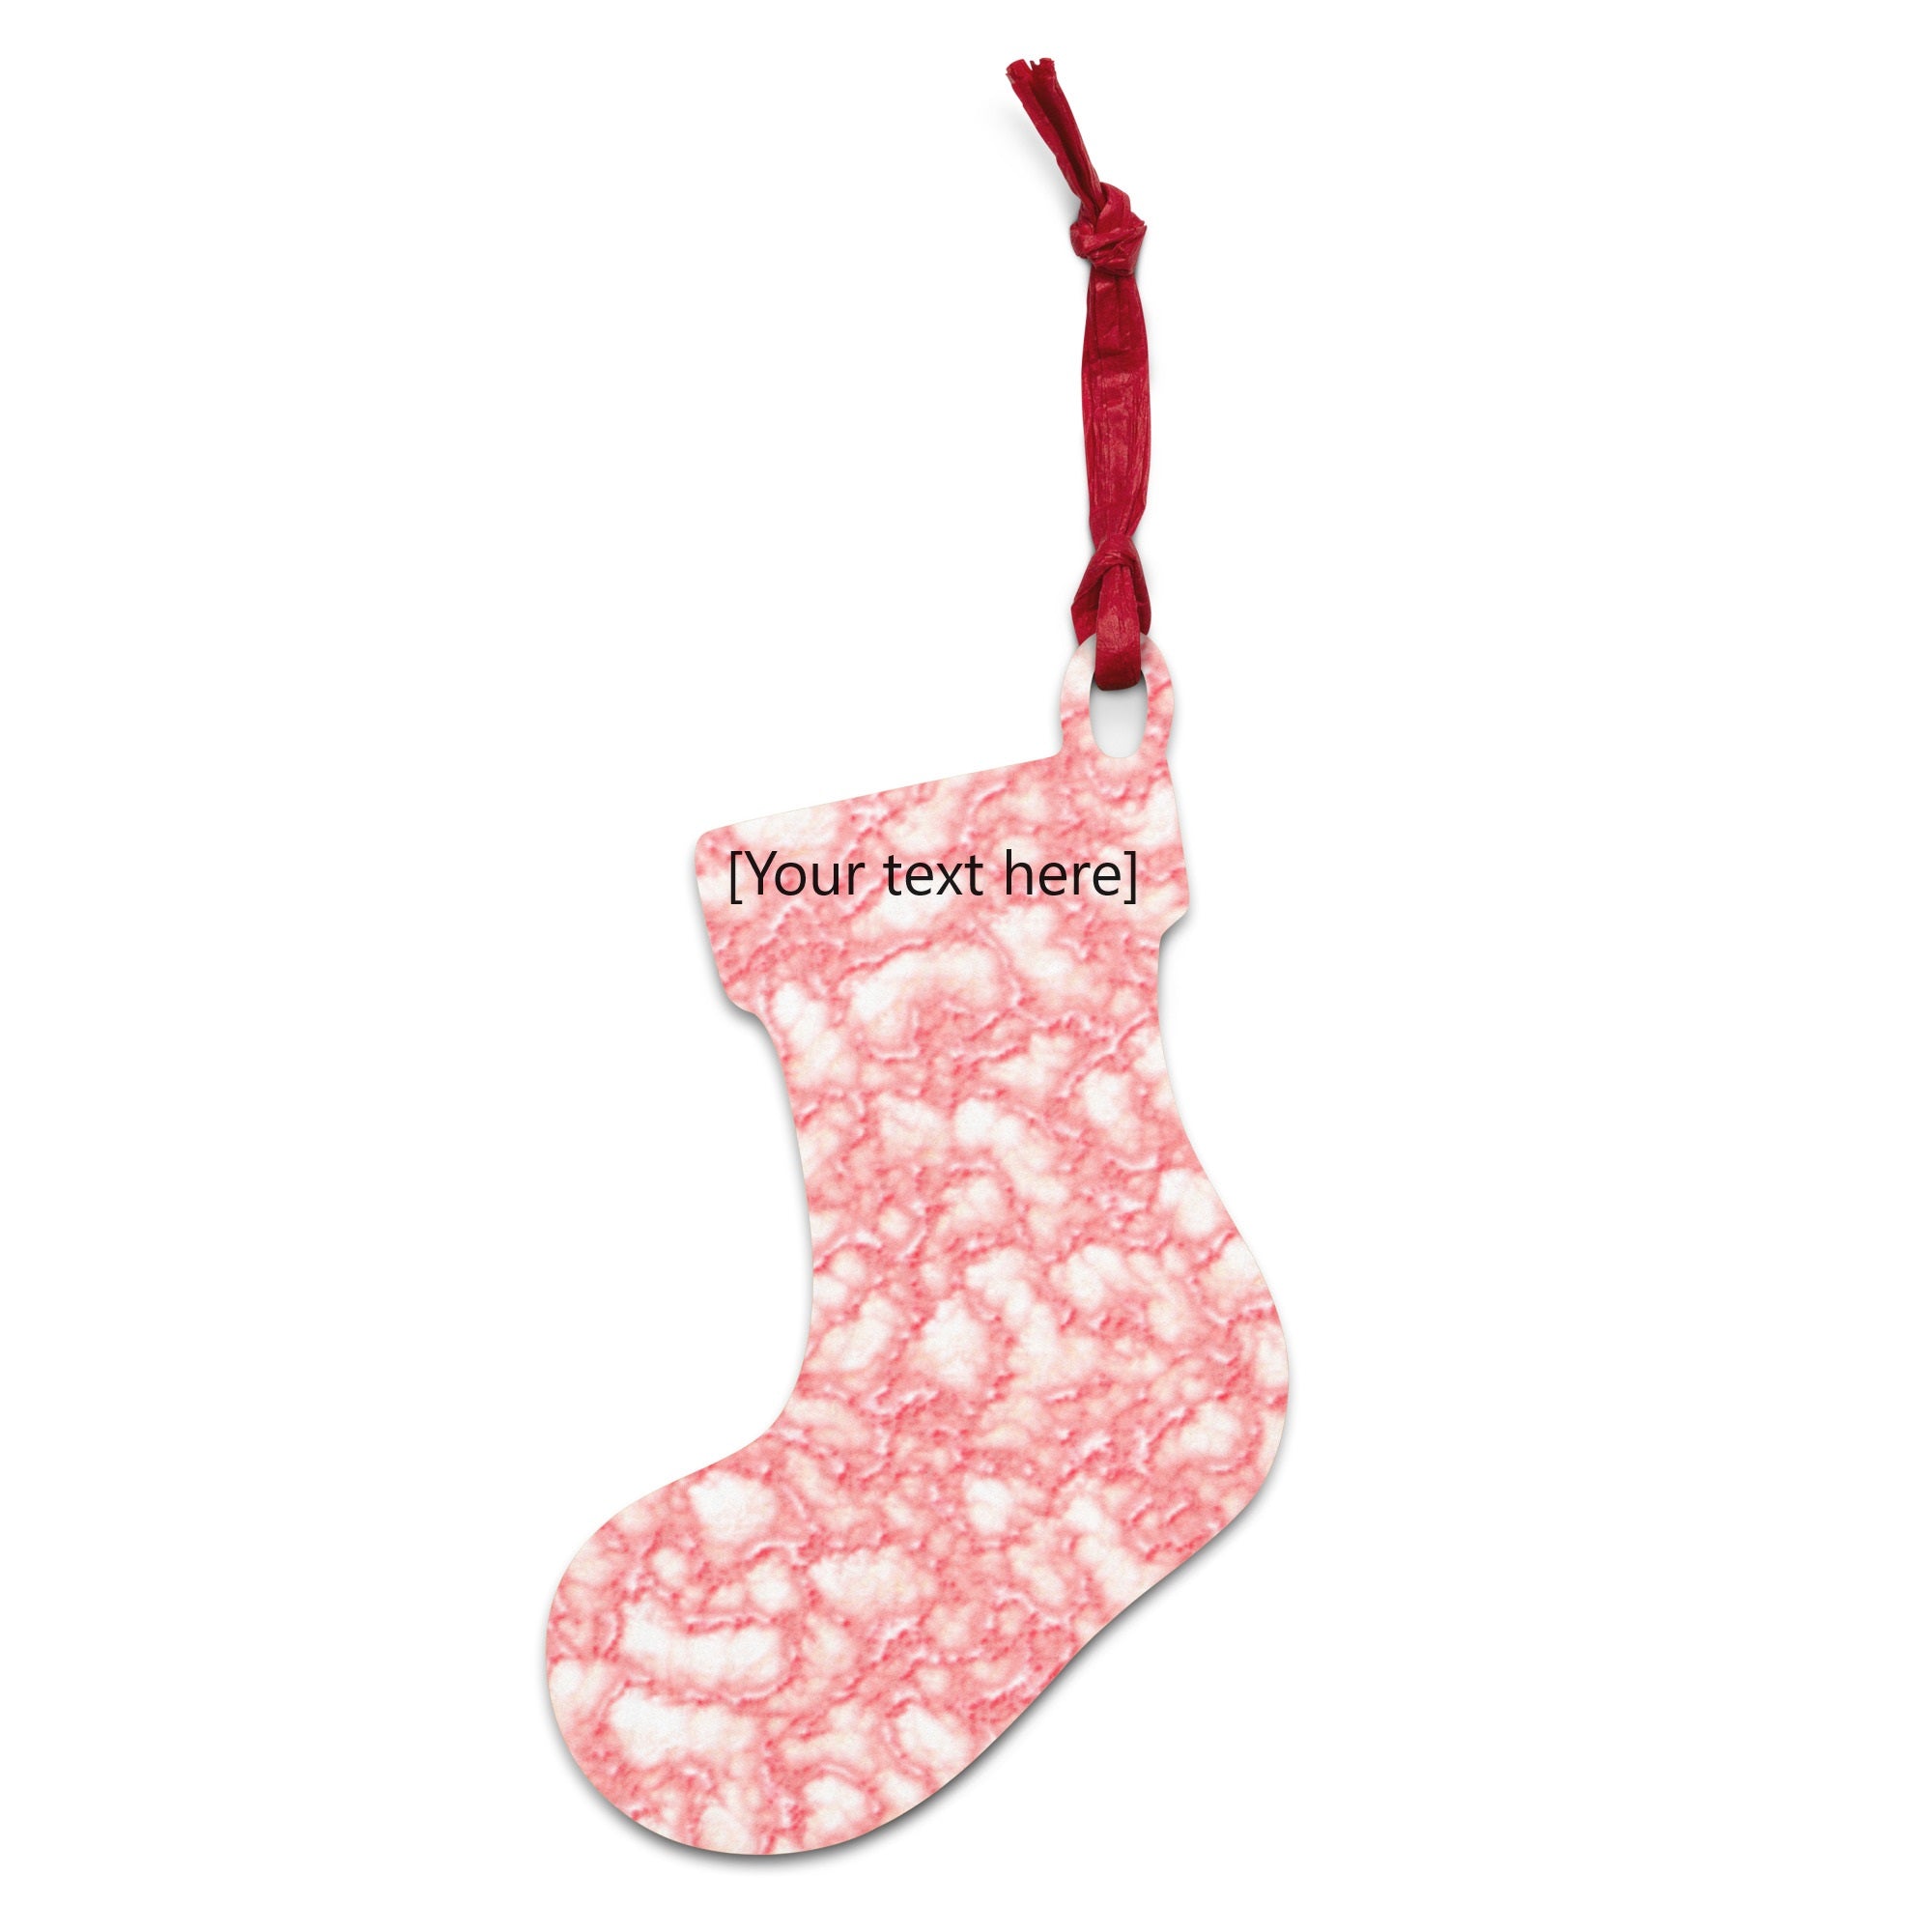 pink bubblegum design on a wooden ornament shaped like a Christmas stocking